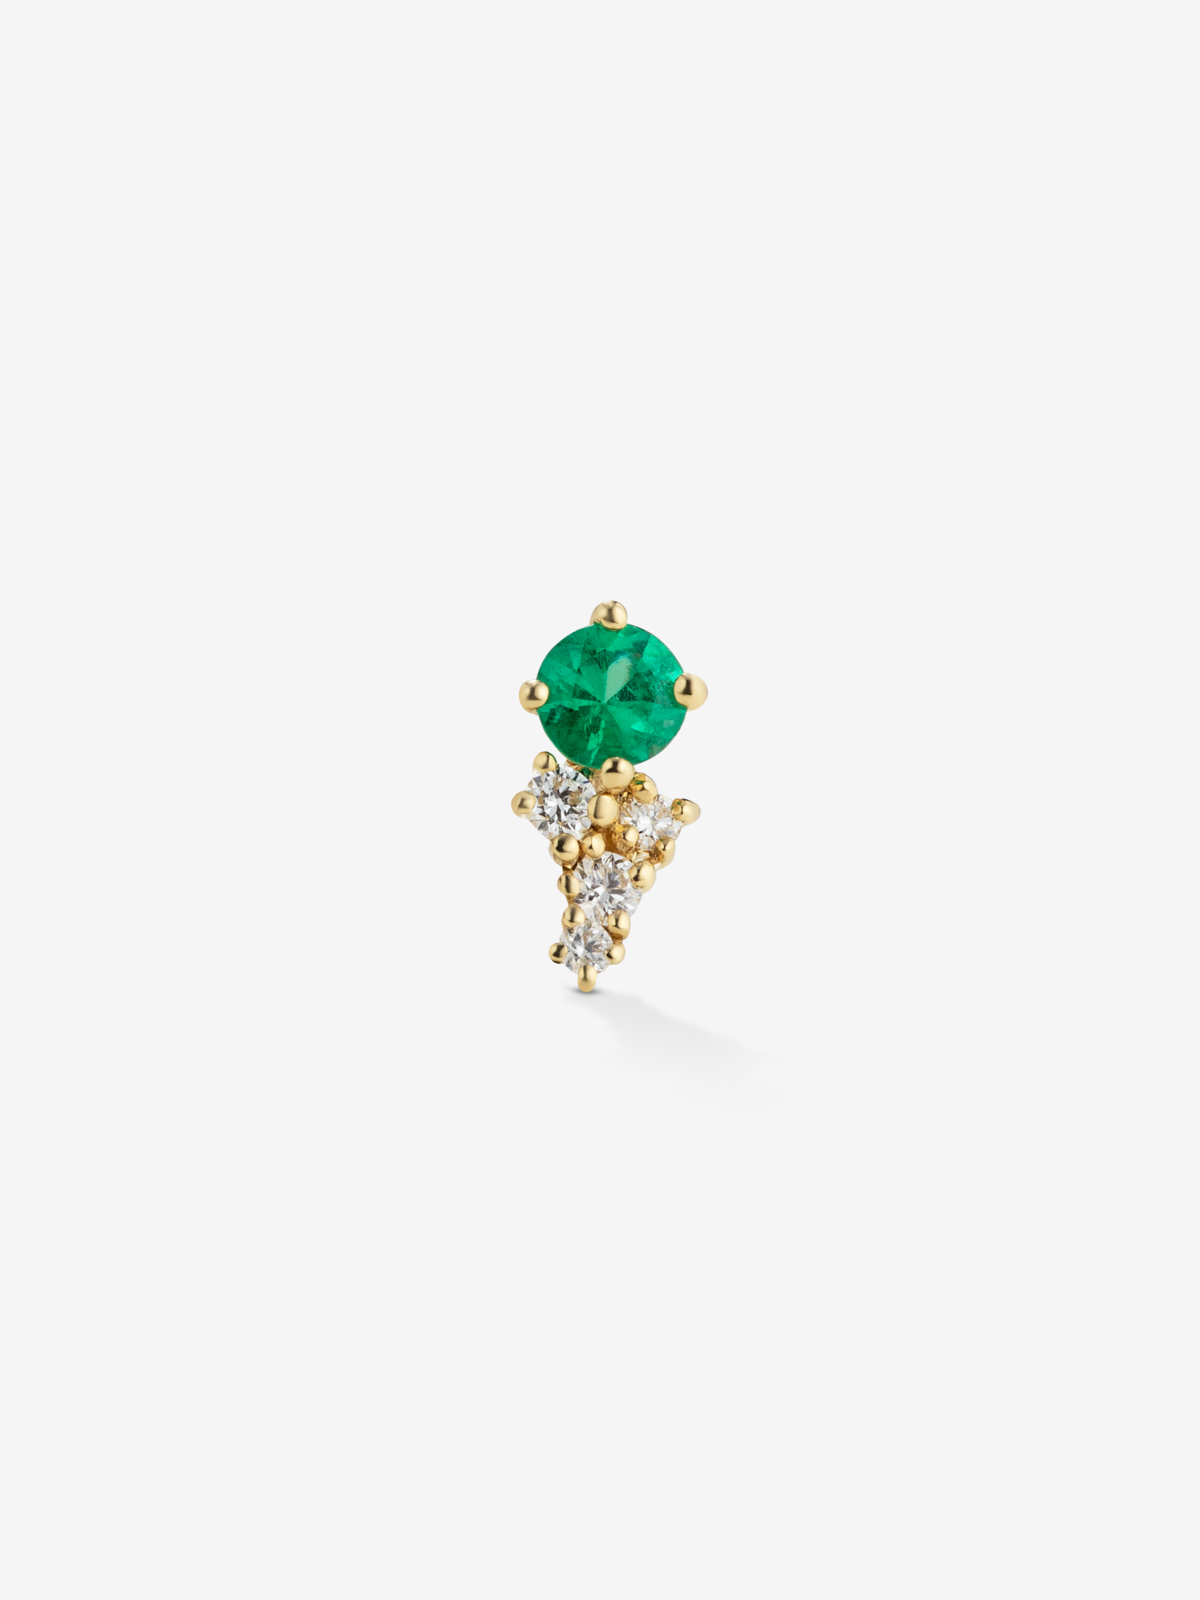 Right individual earring made of 18K yellow gold with emerald and diamonds.